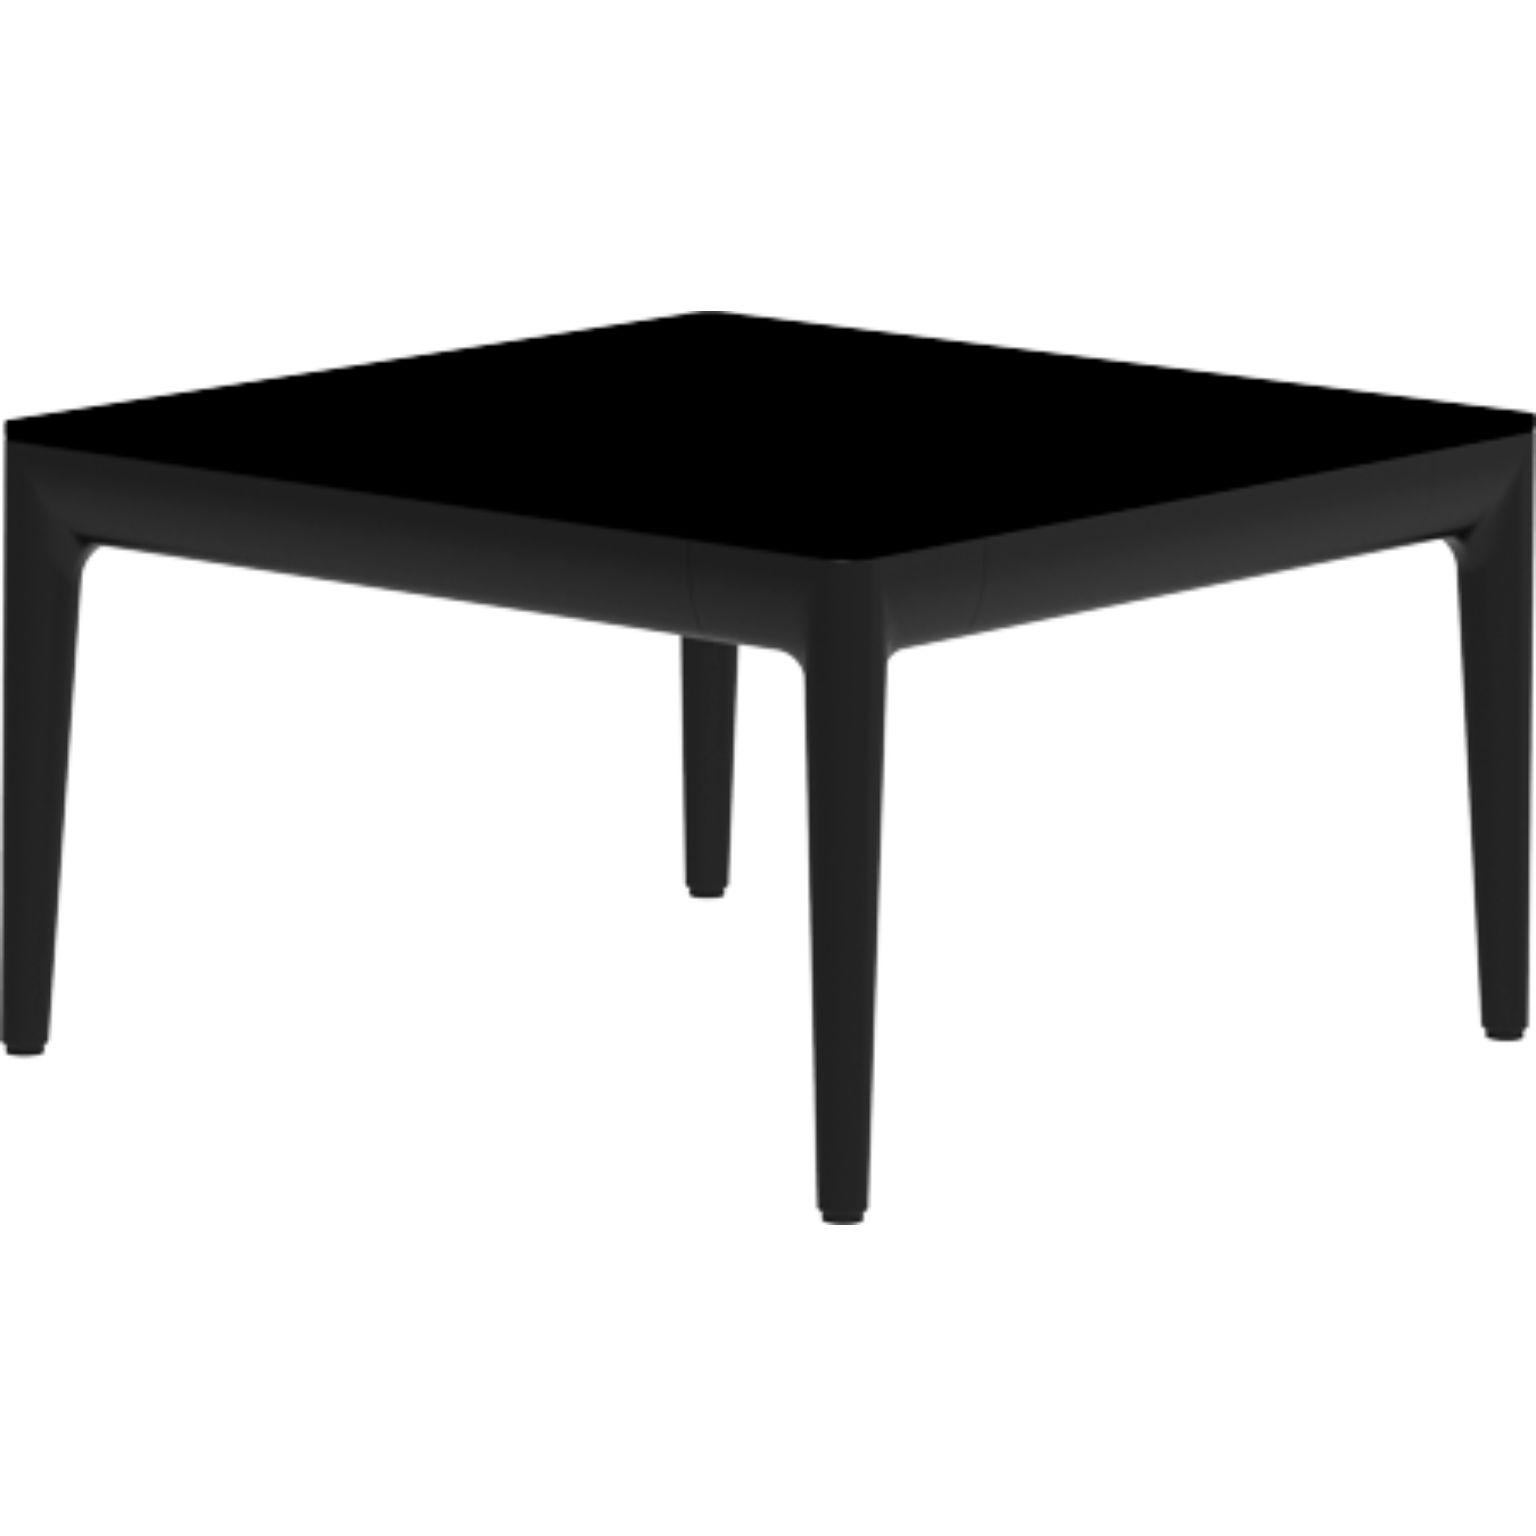 Ribbons Black 50 Coffee Table by MOWEE.
Dimensions: D 50 x W 50 x H 29 cm.
Material: Aluminum and HPL top.
Weight: 8 kg.
Also available in different colors and finishes. (HPL Black Edge or Neolith top).

An unmistakable collection for its beauty and